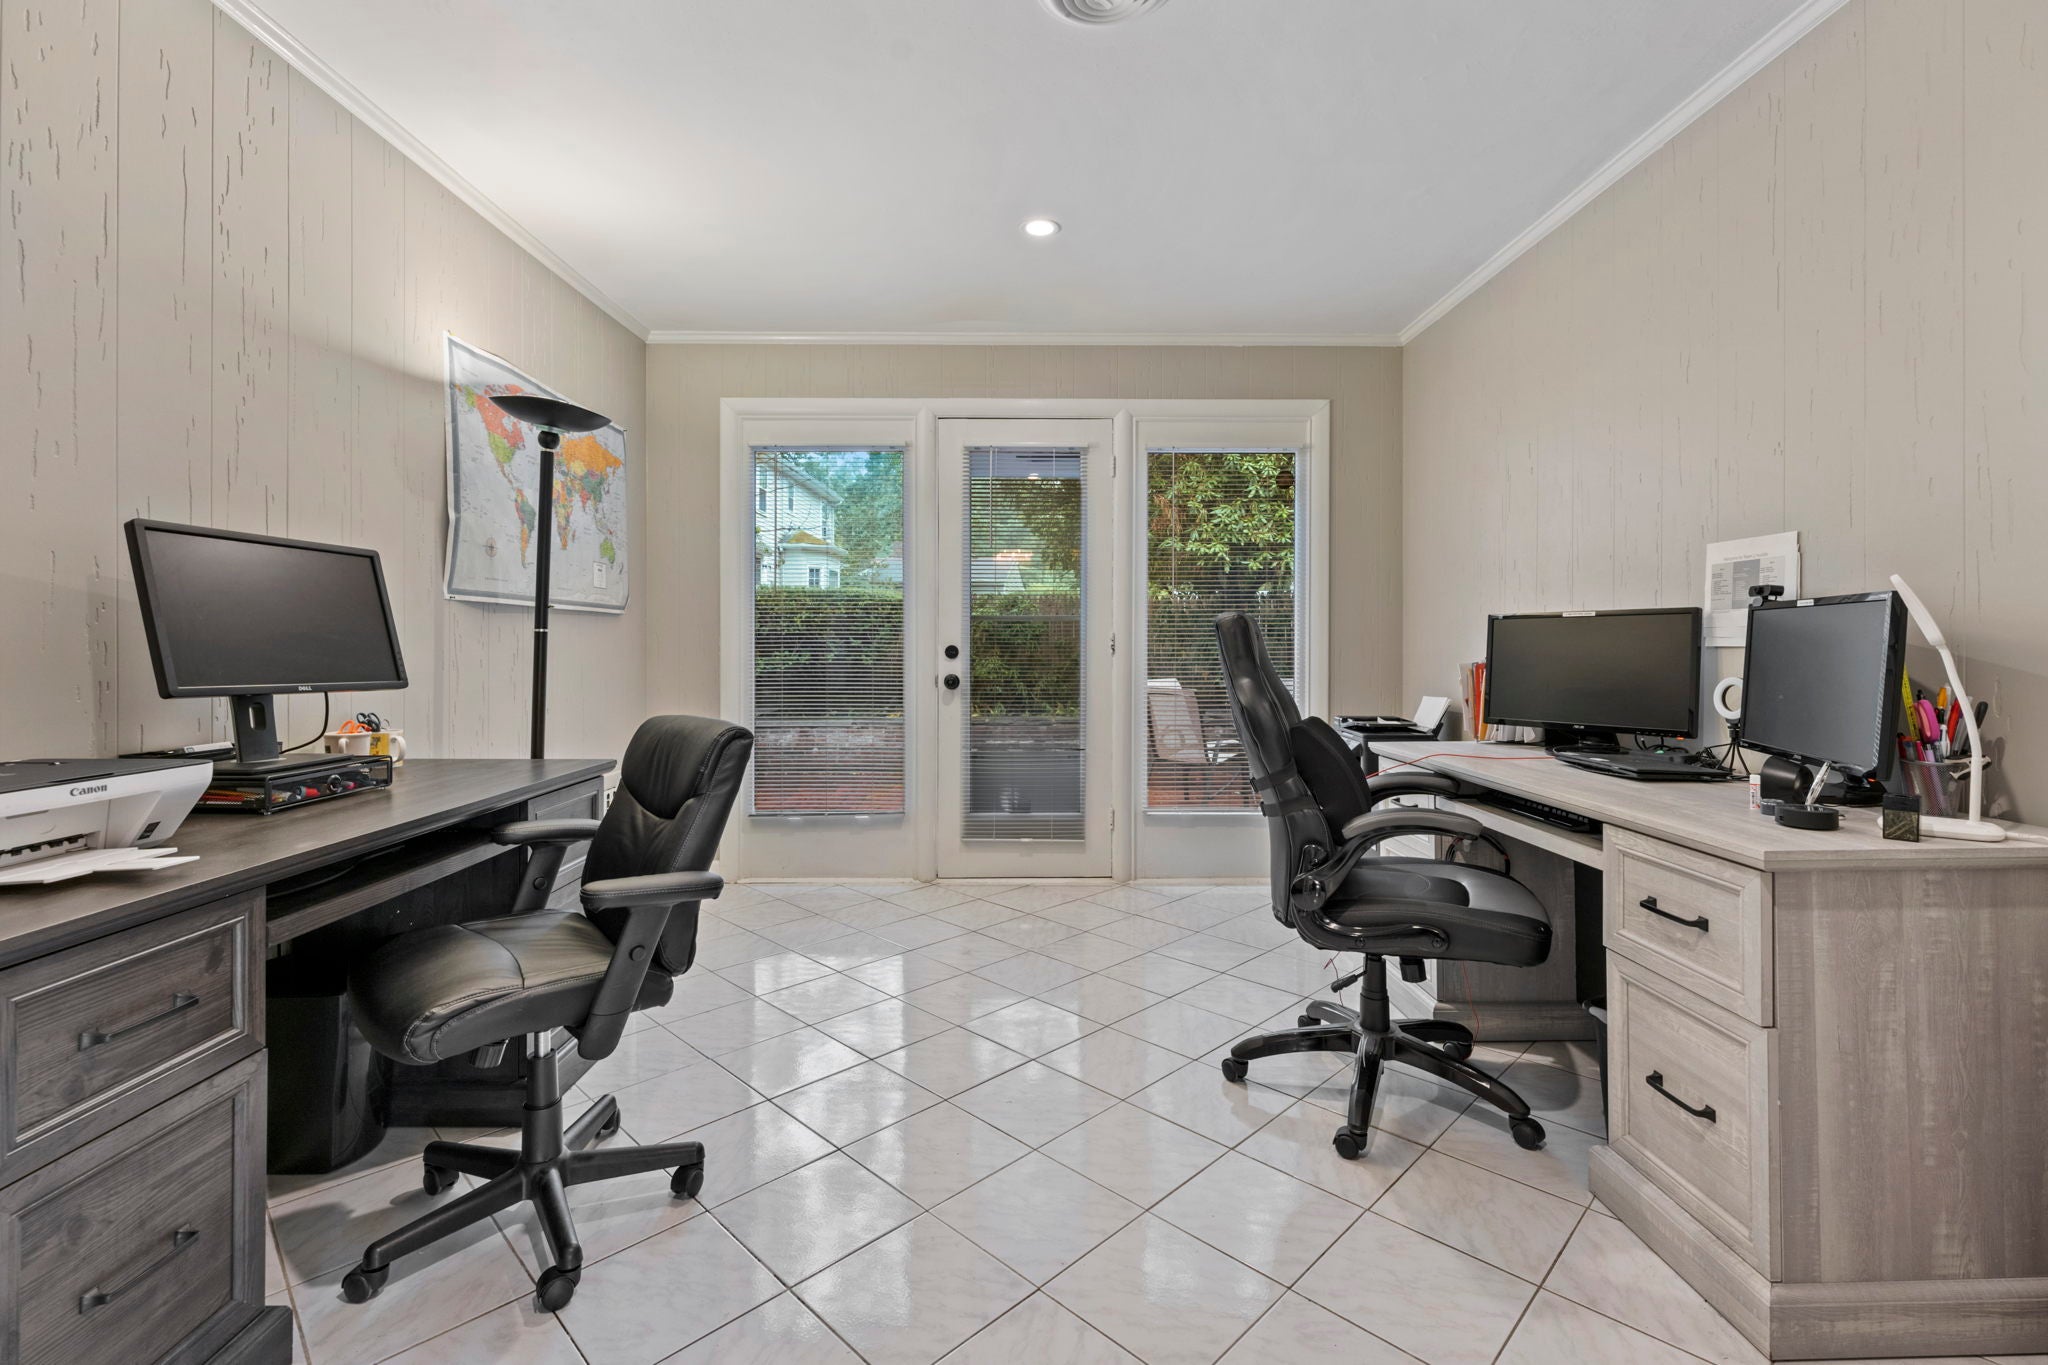 An office with two desks, wood paneling, a single door to a patio, and a white tile floor.